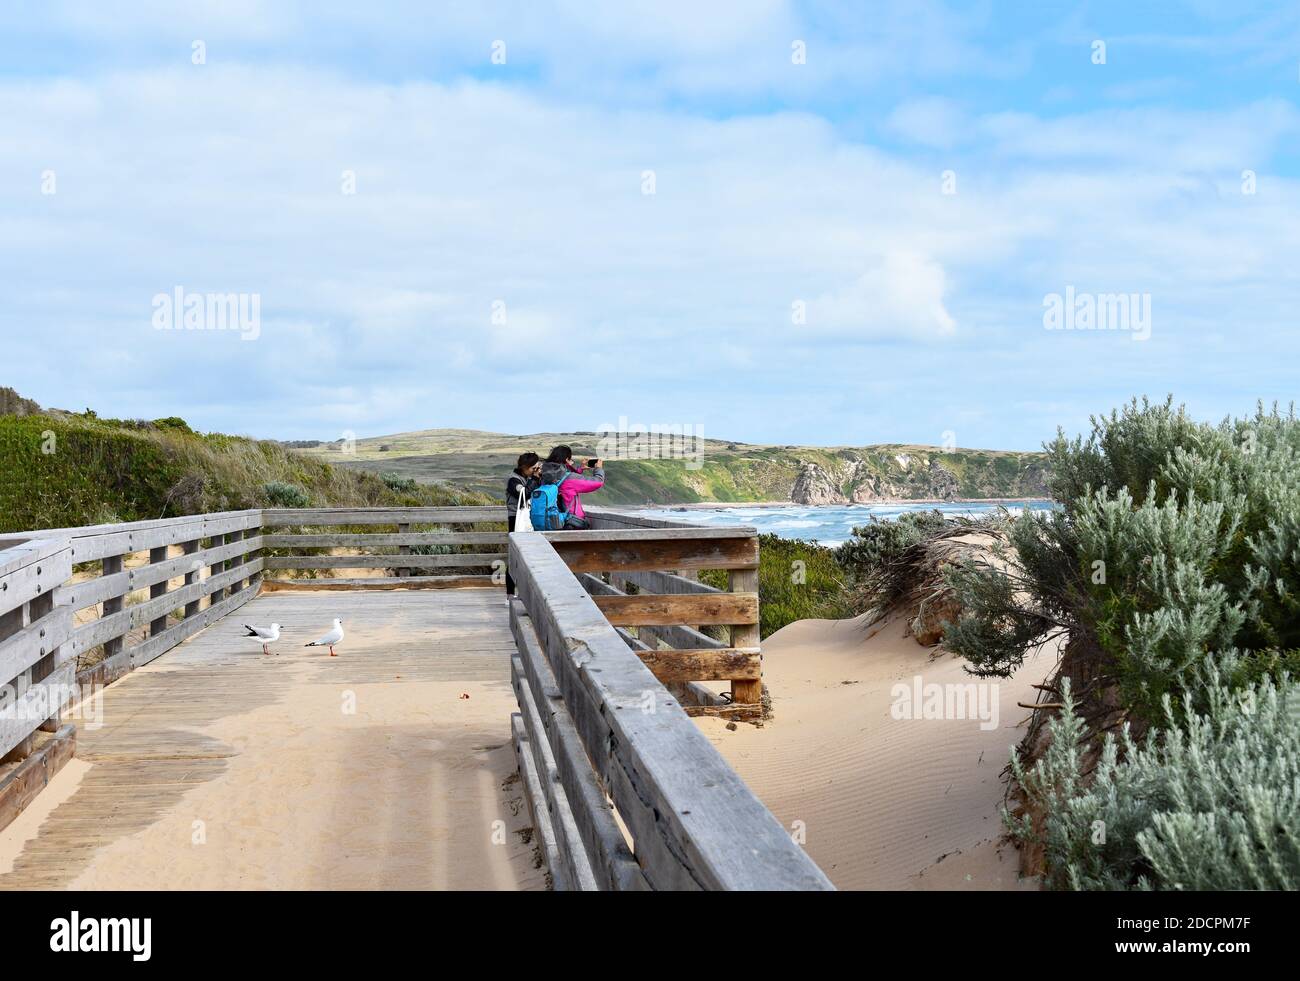 Two visitors taking photos stand on a wooden viewing platform overlooks Cape Woolamai Beach on Phillip Island, Victoria, Australia. Stock Photo